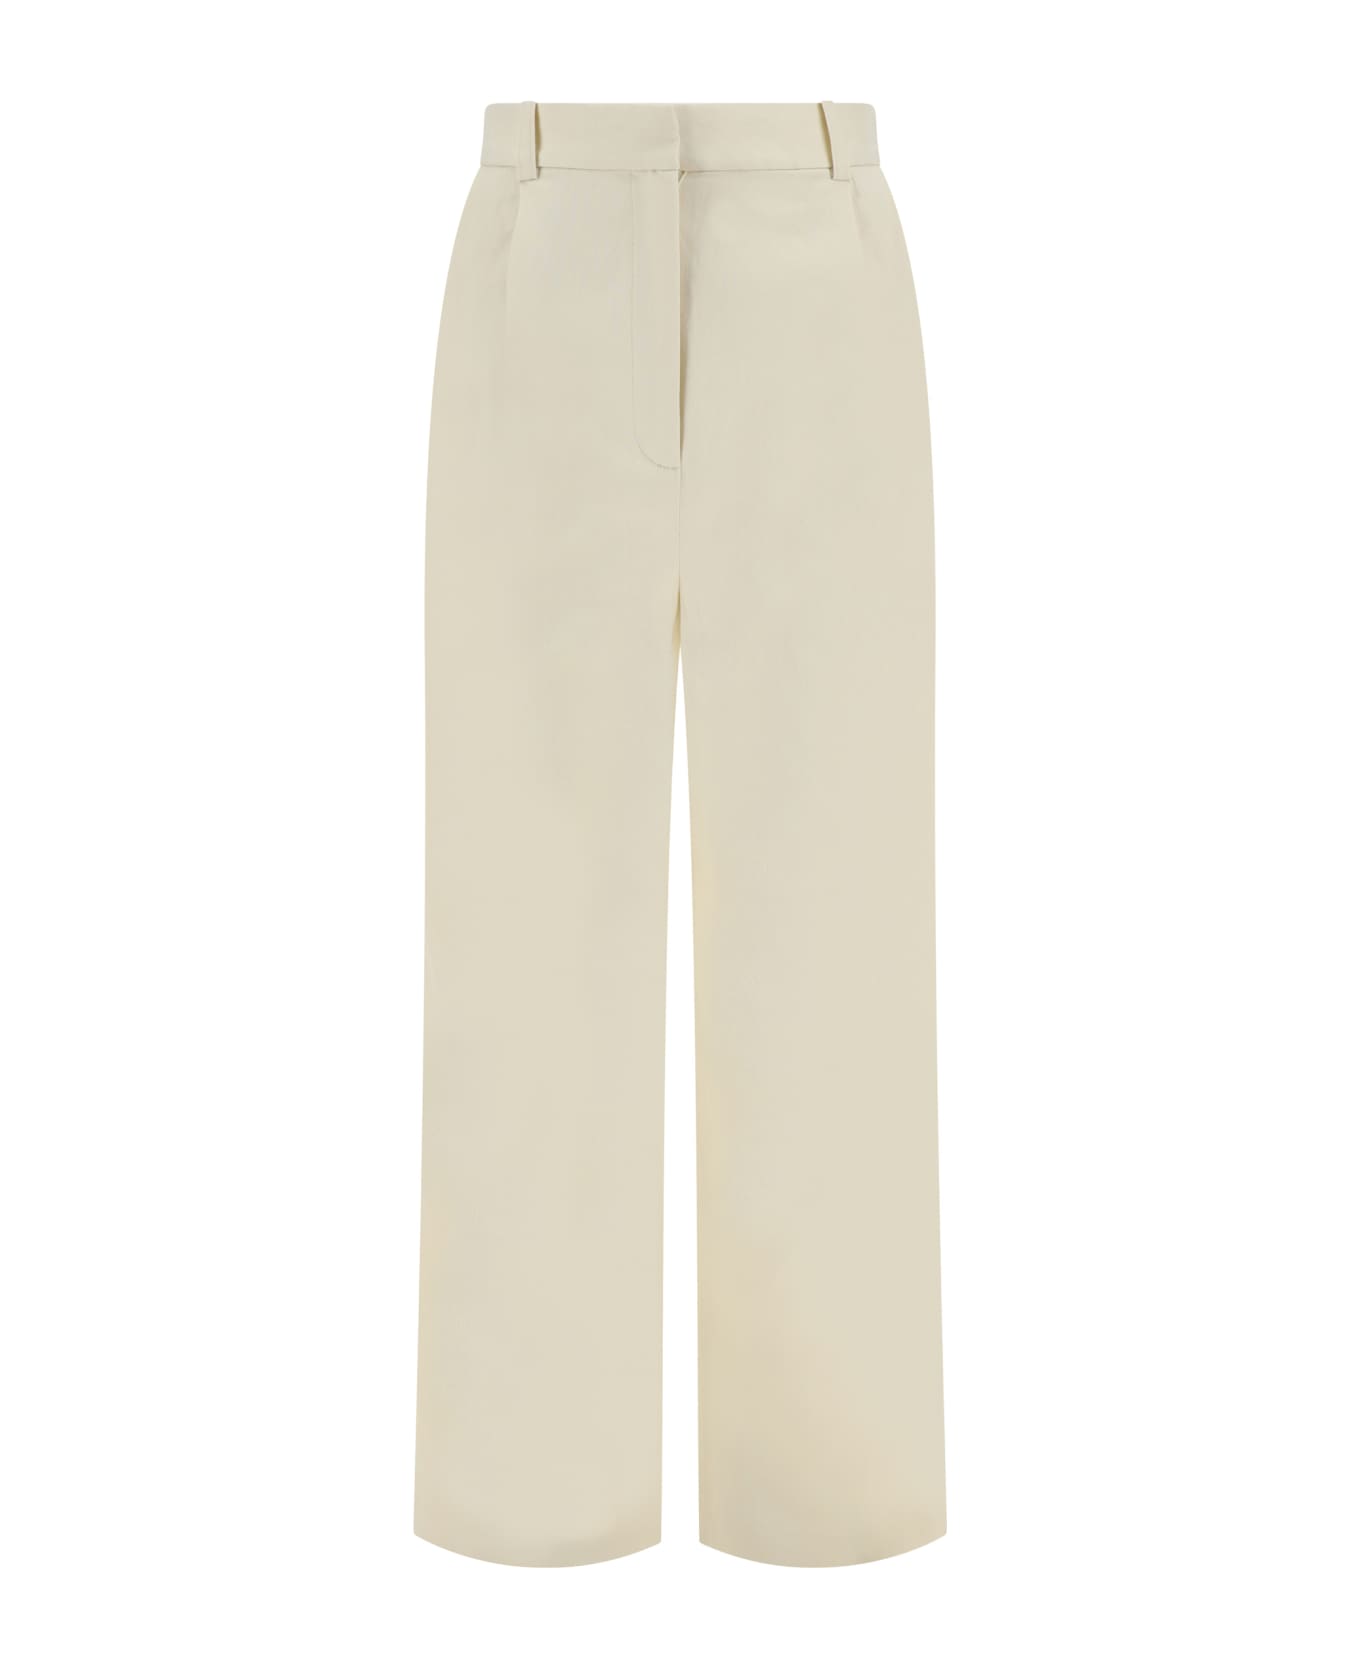 Loulou Studio Pants - Frost Ivory